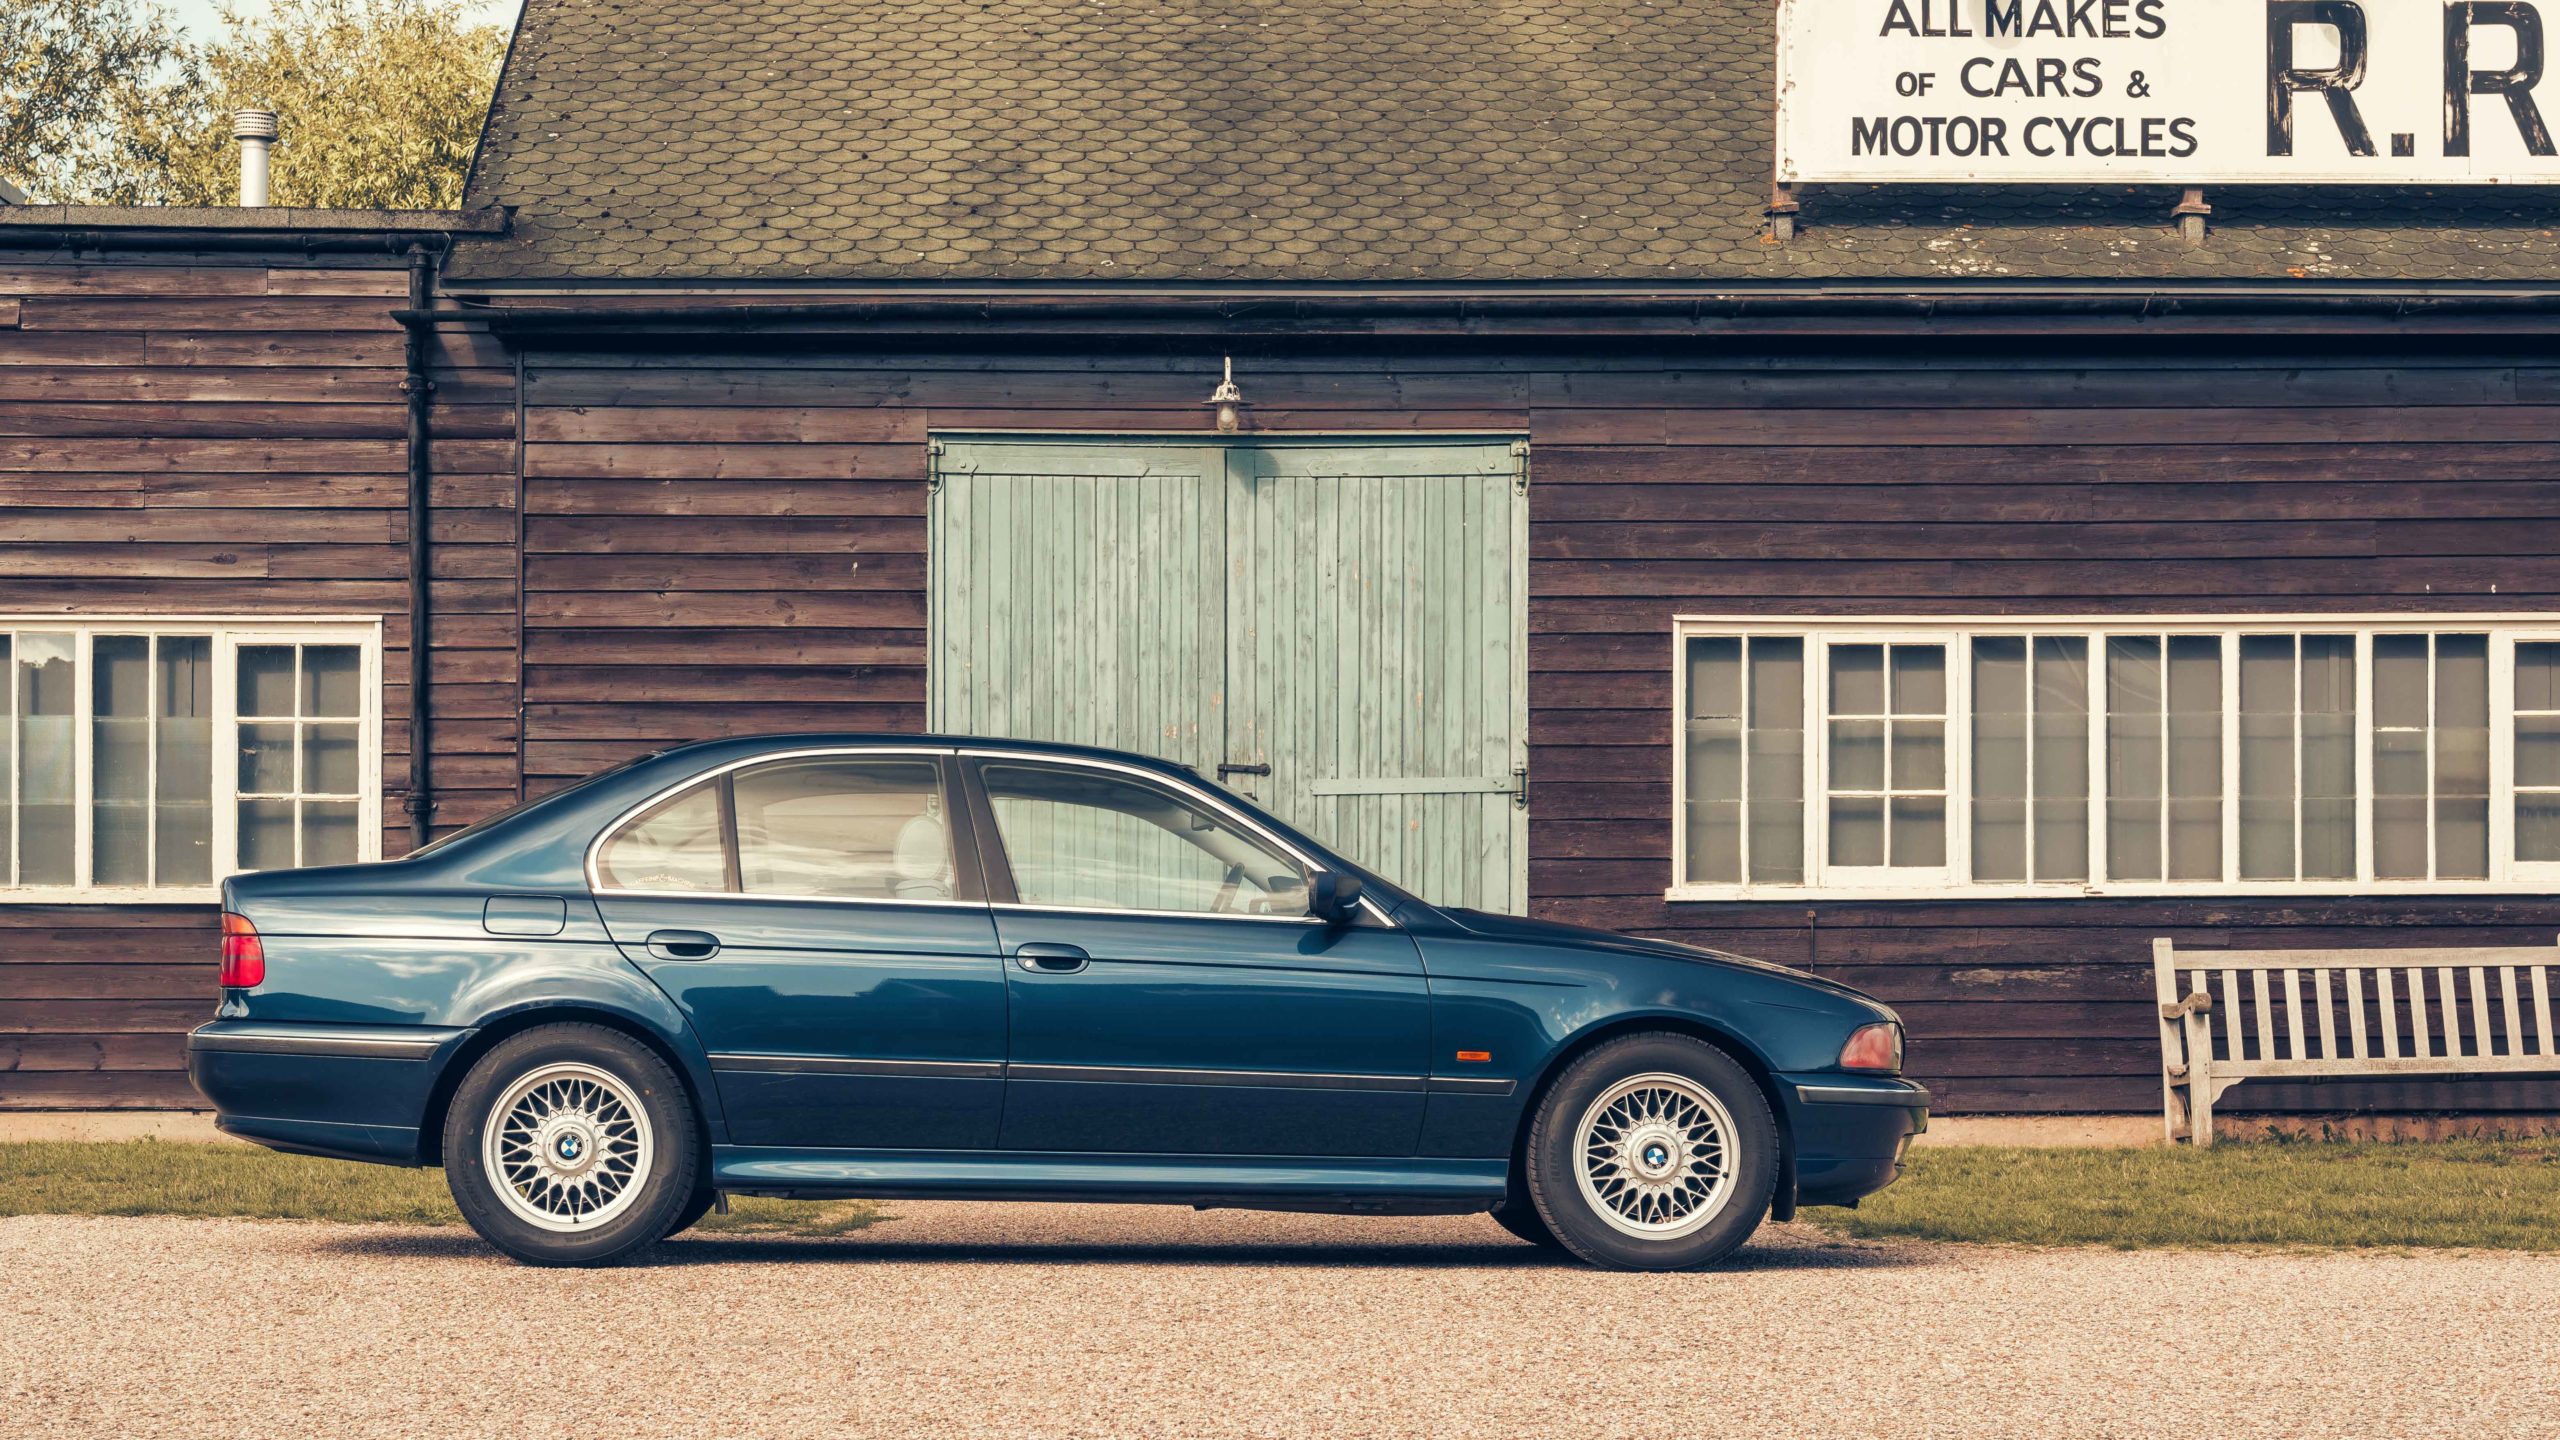 gallery: every single top gear car of the year winner of the last 30 years